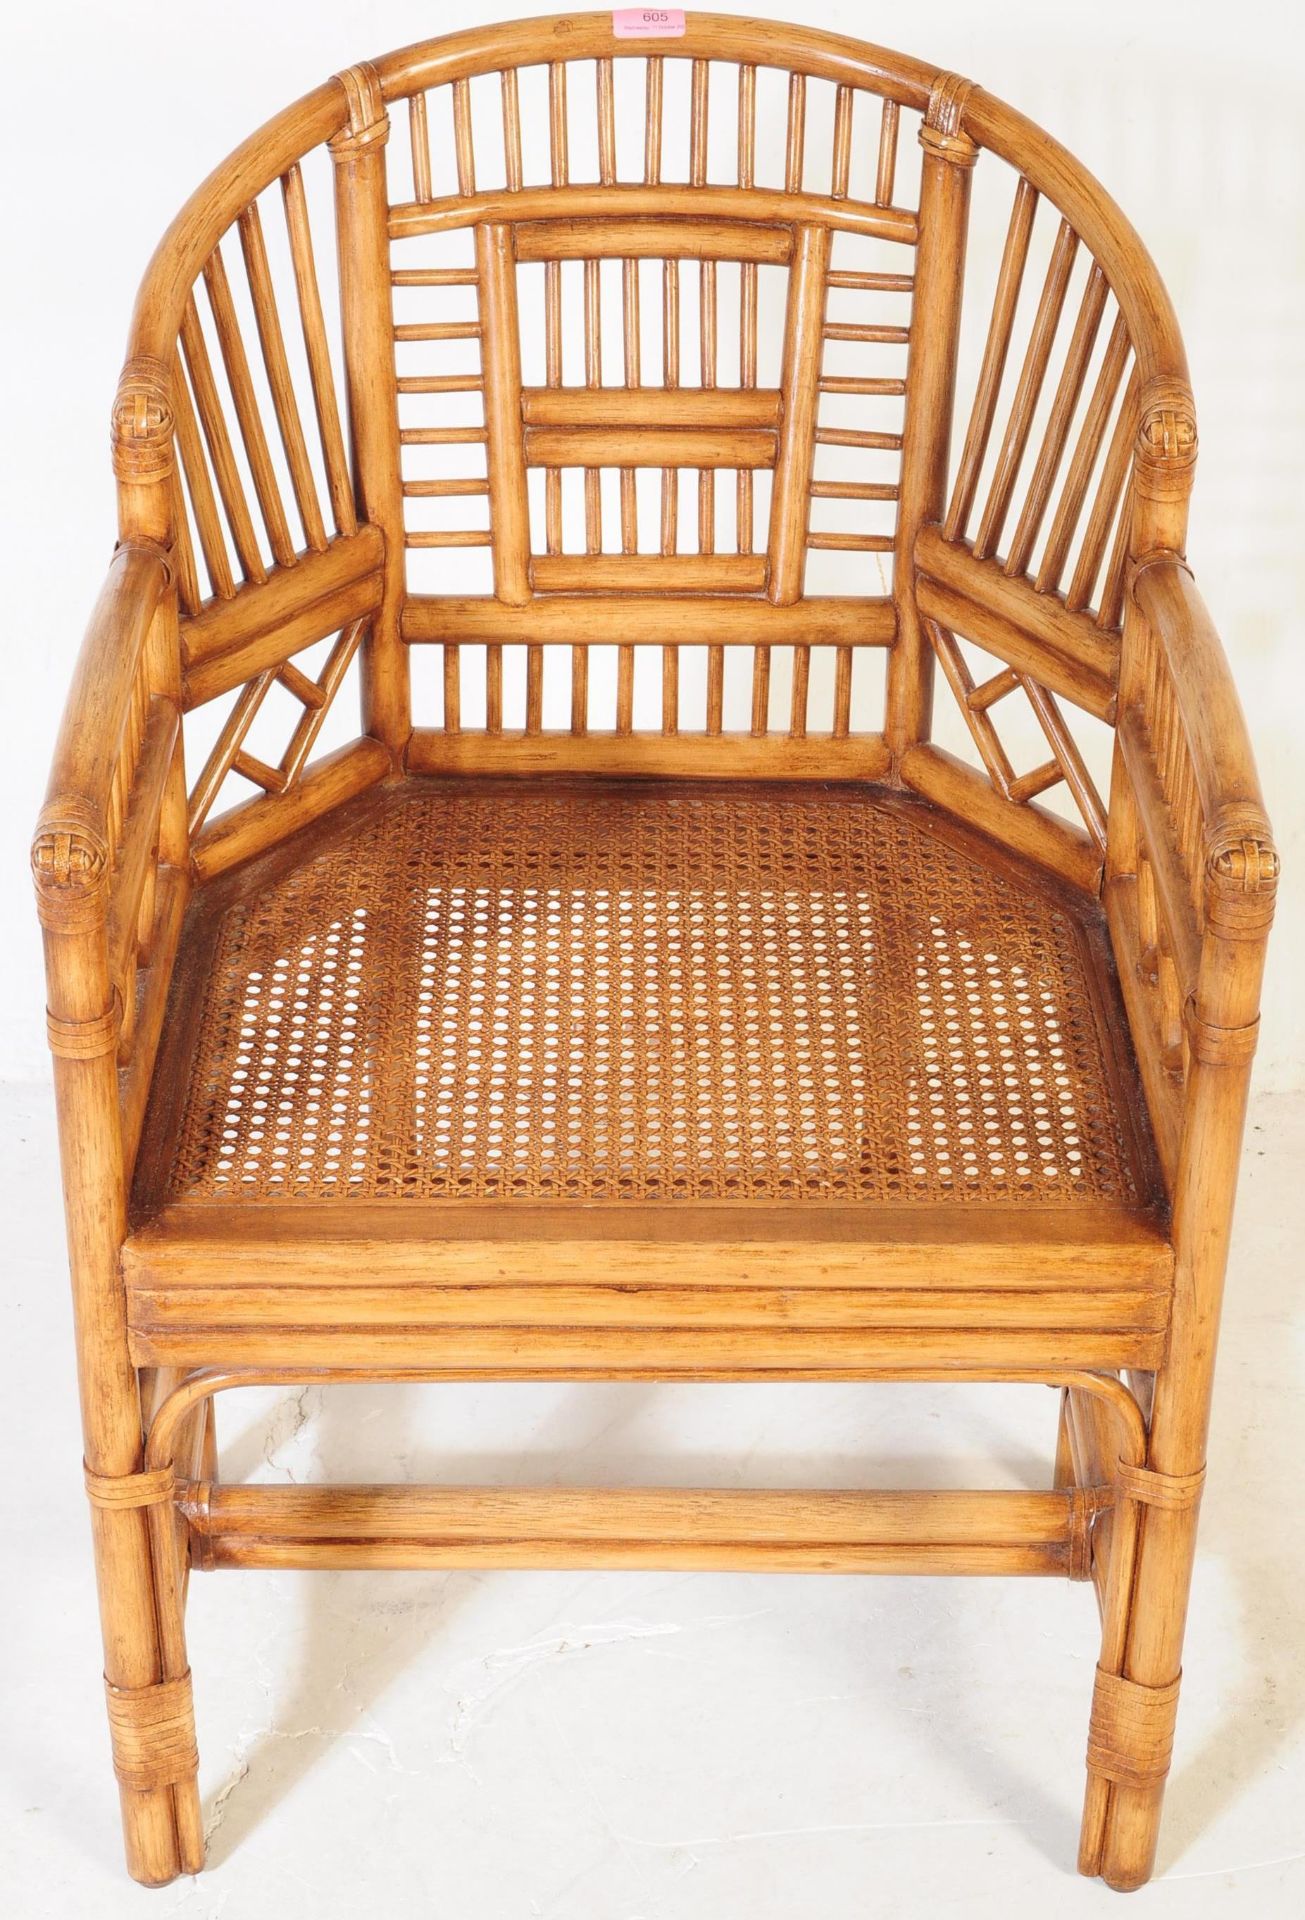 MID CENTURY 1960S BAMBOO ITALIAN STYLE CONSERVATORY CHAIR - Image 3 of 7